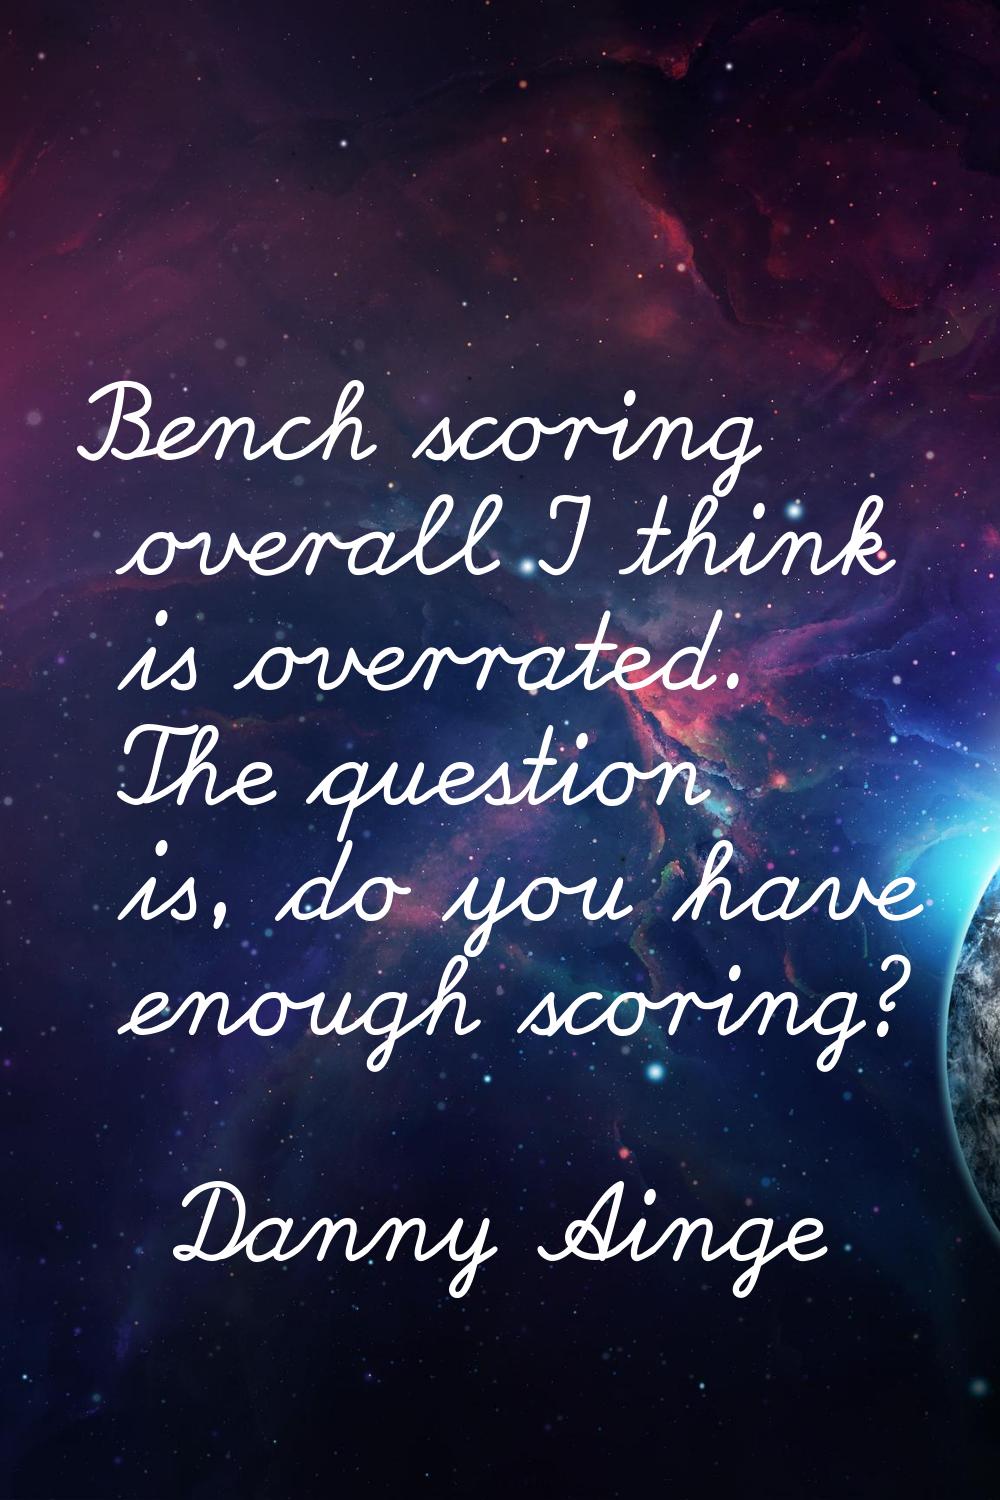 Bench scoring overall I think is overrated. The question is, do you have enough scoring?